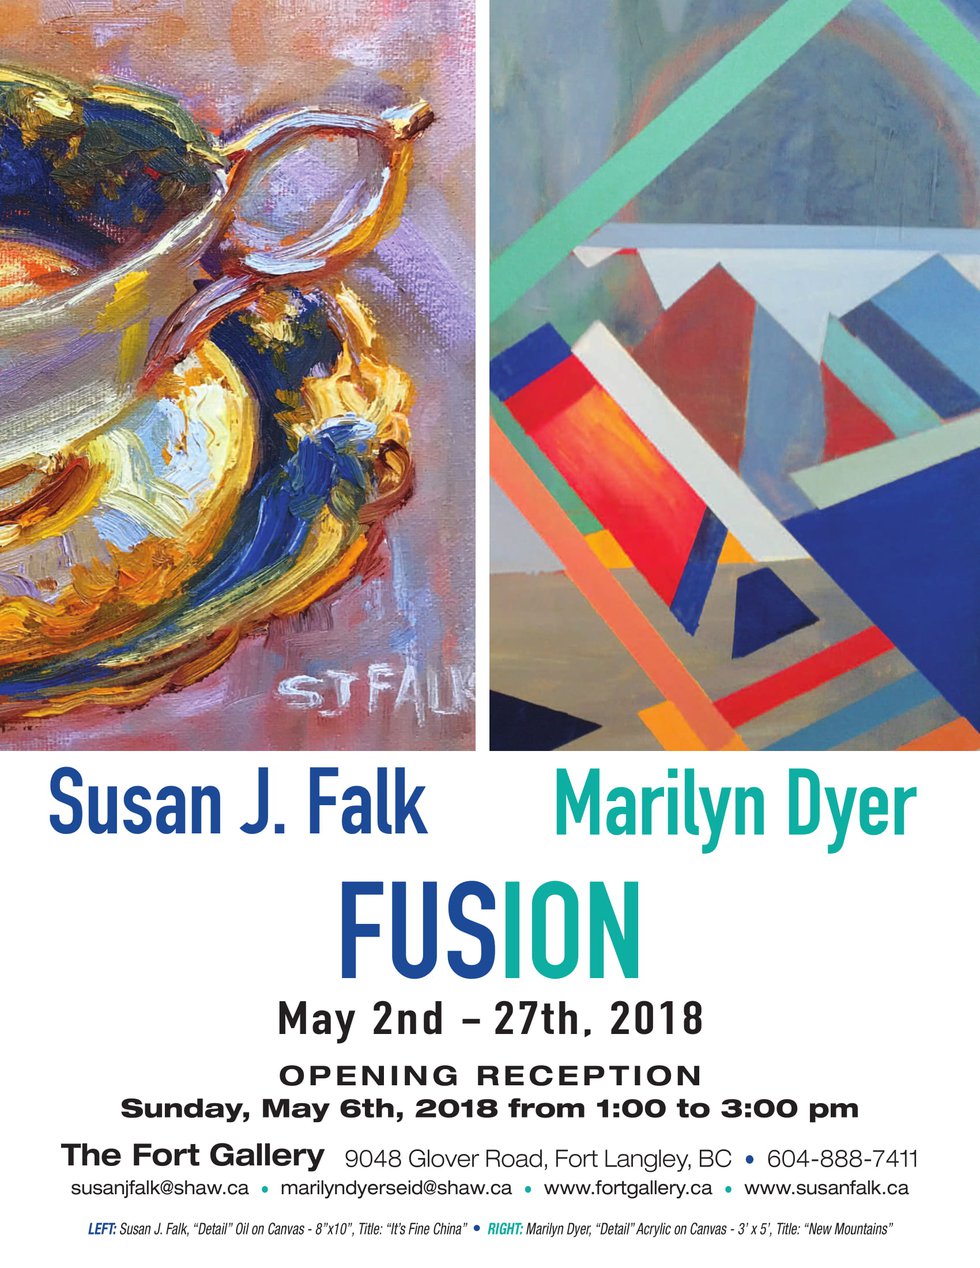 Susan J. Falk and Marilyn Dyer, "Fusion," 2018